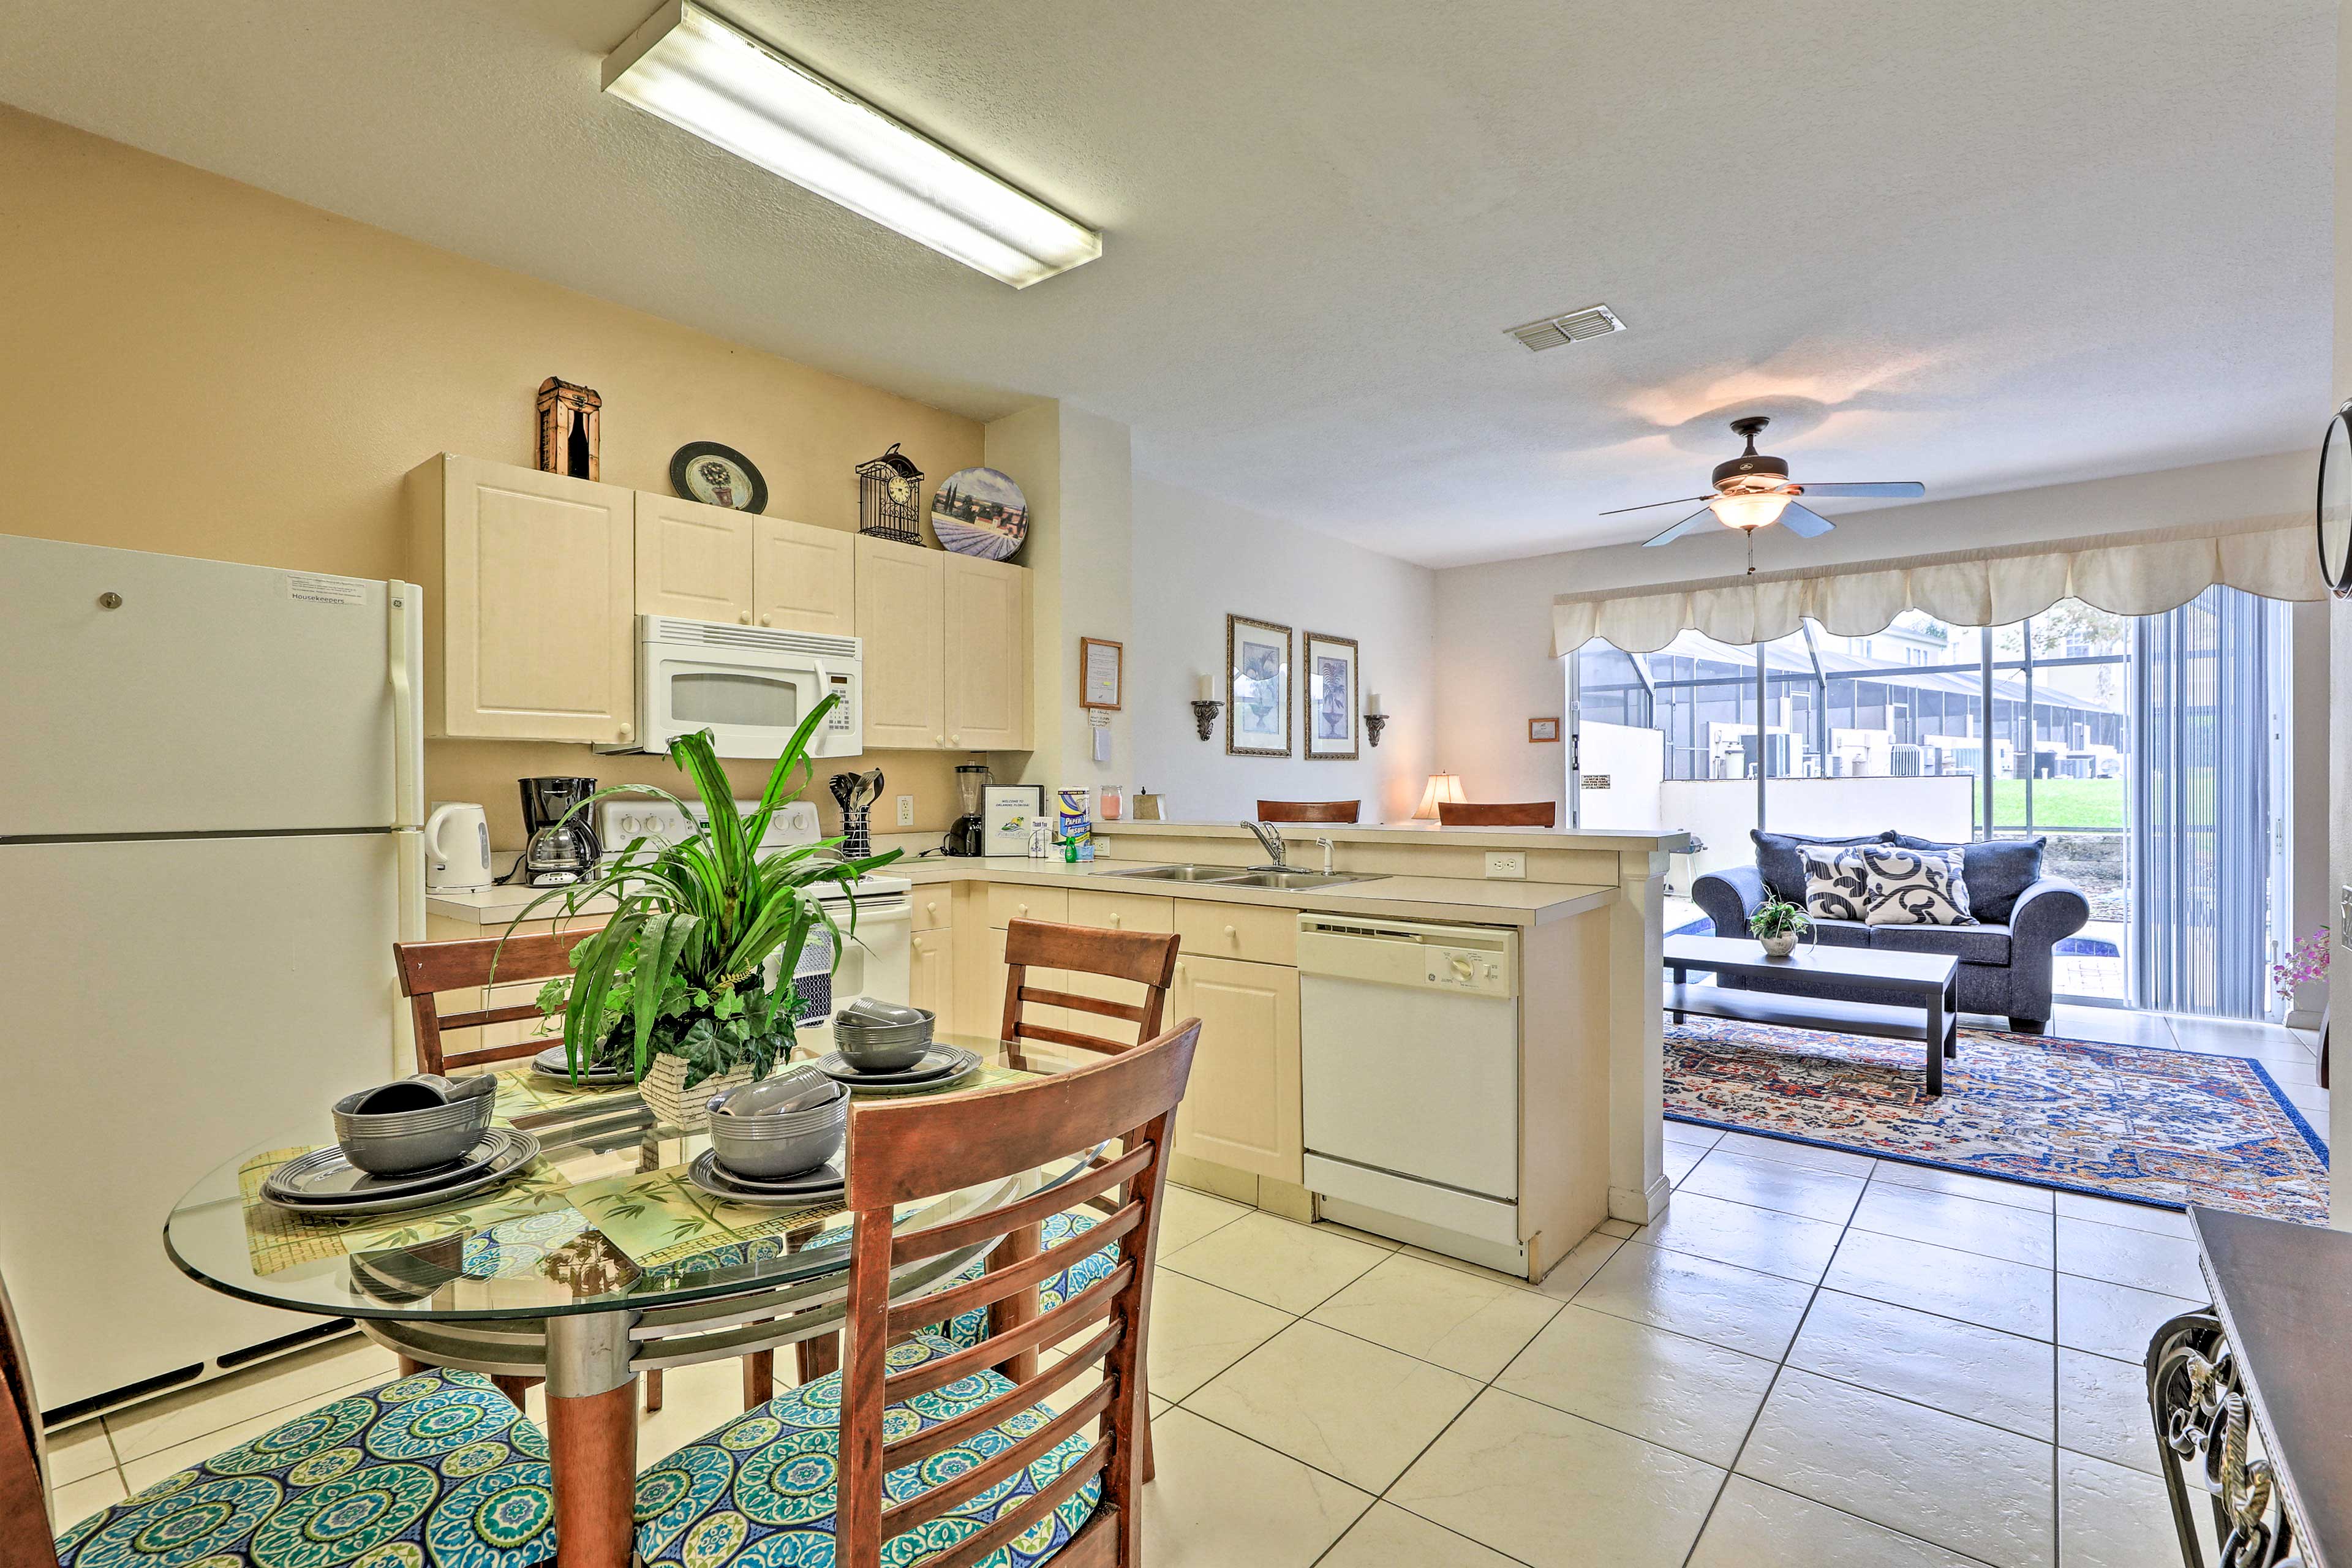 Kitchen | 1st Floor | Fully Equipped